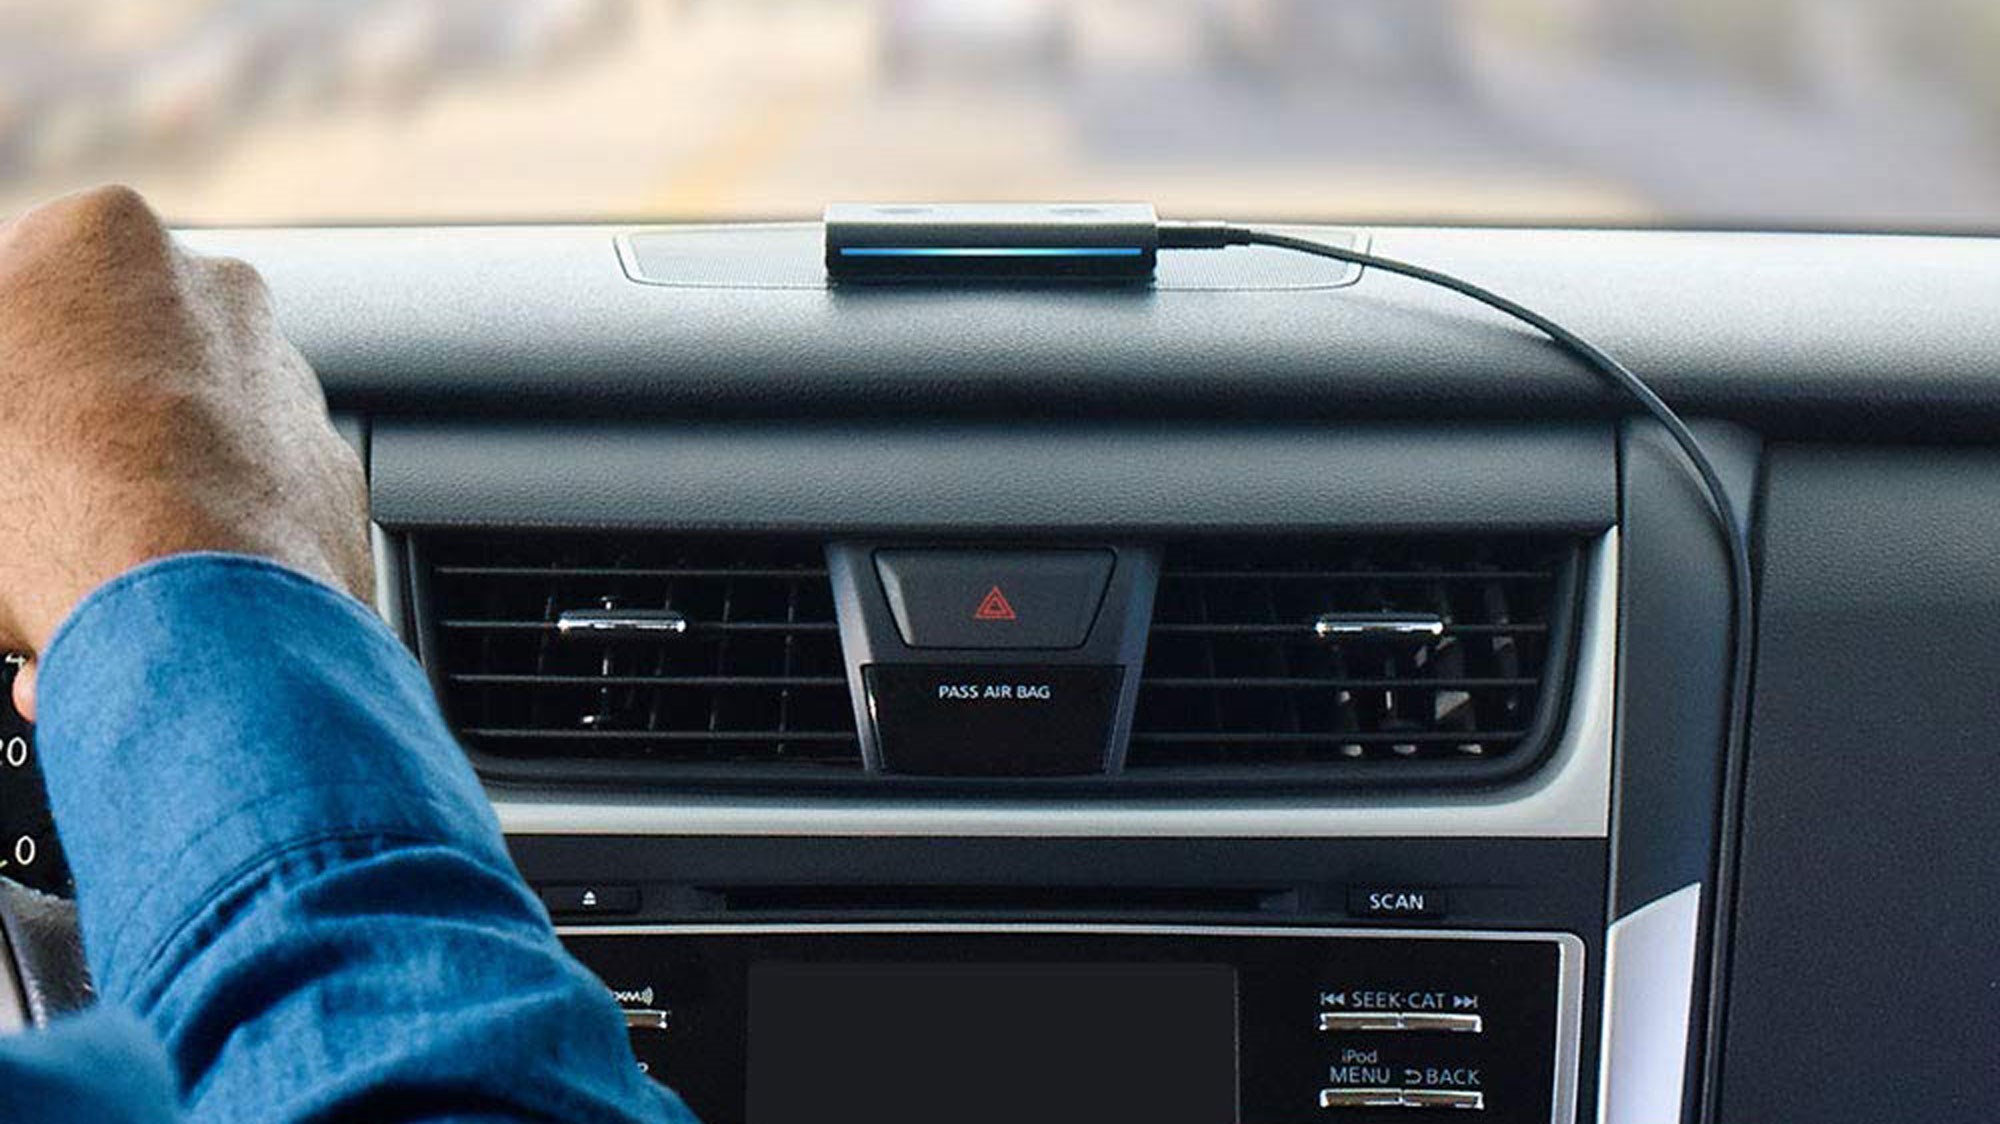 New Echo Auto Device Brings  Alexa to Your Car